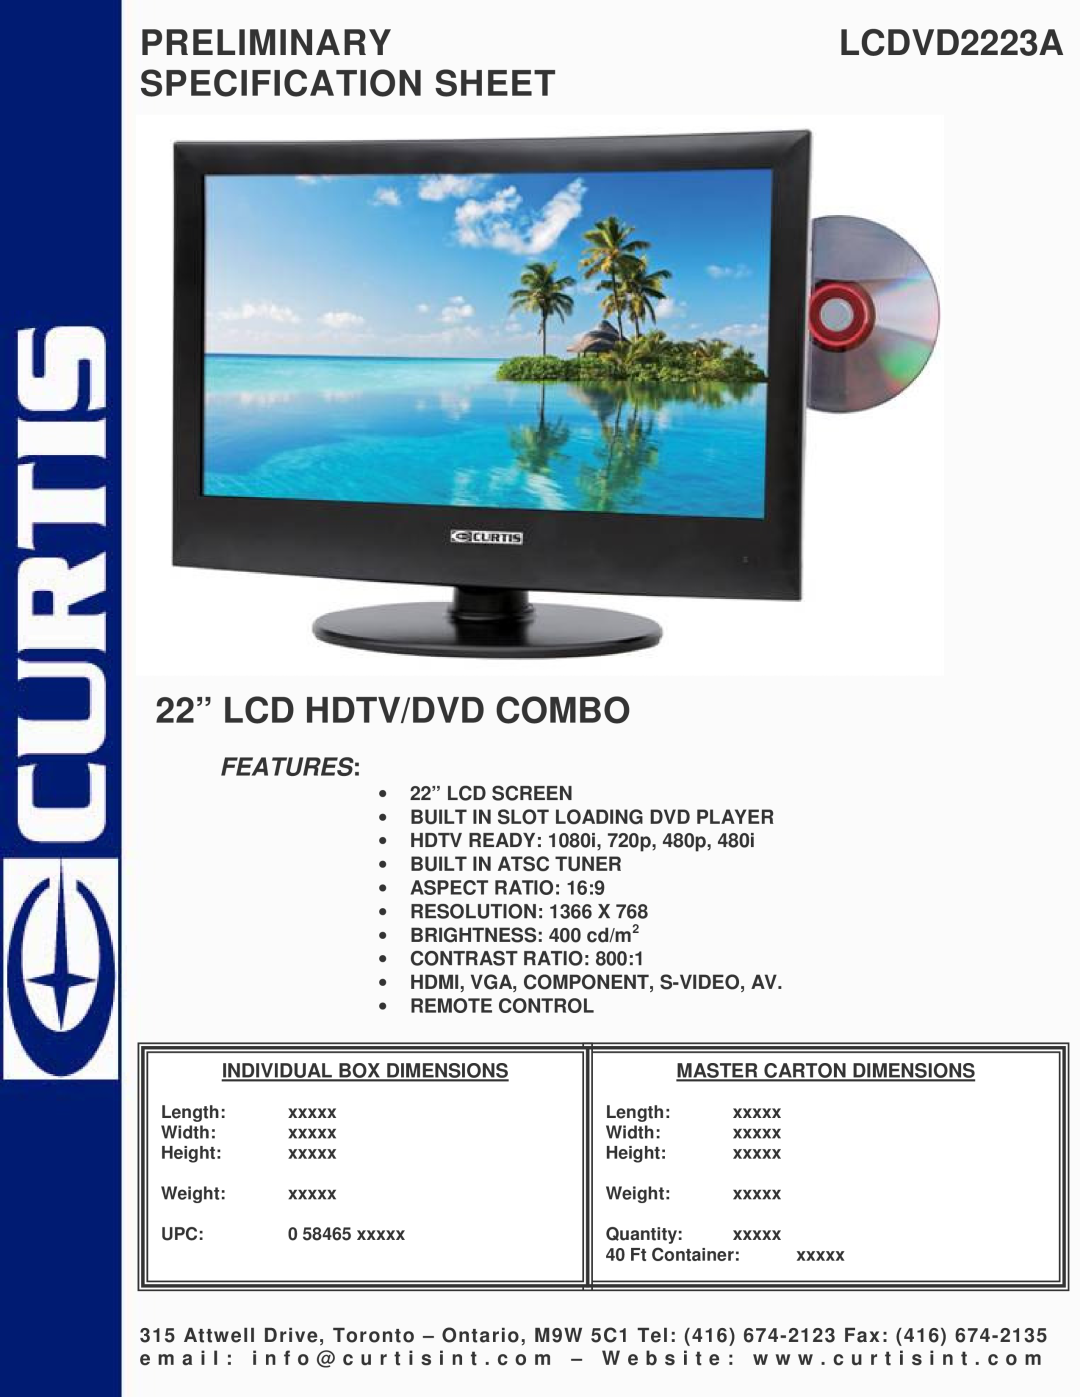 Curtis specifications PRELIMINARYLCDVD2223A SPECIFICATION SHEET 22” LCD HDTV/DVD COMBO, Features 